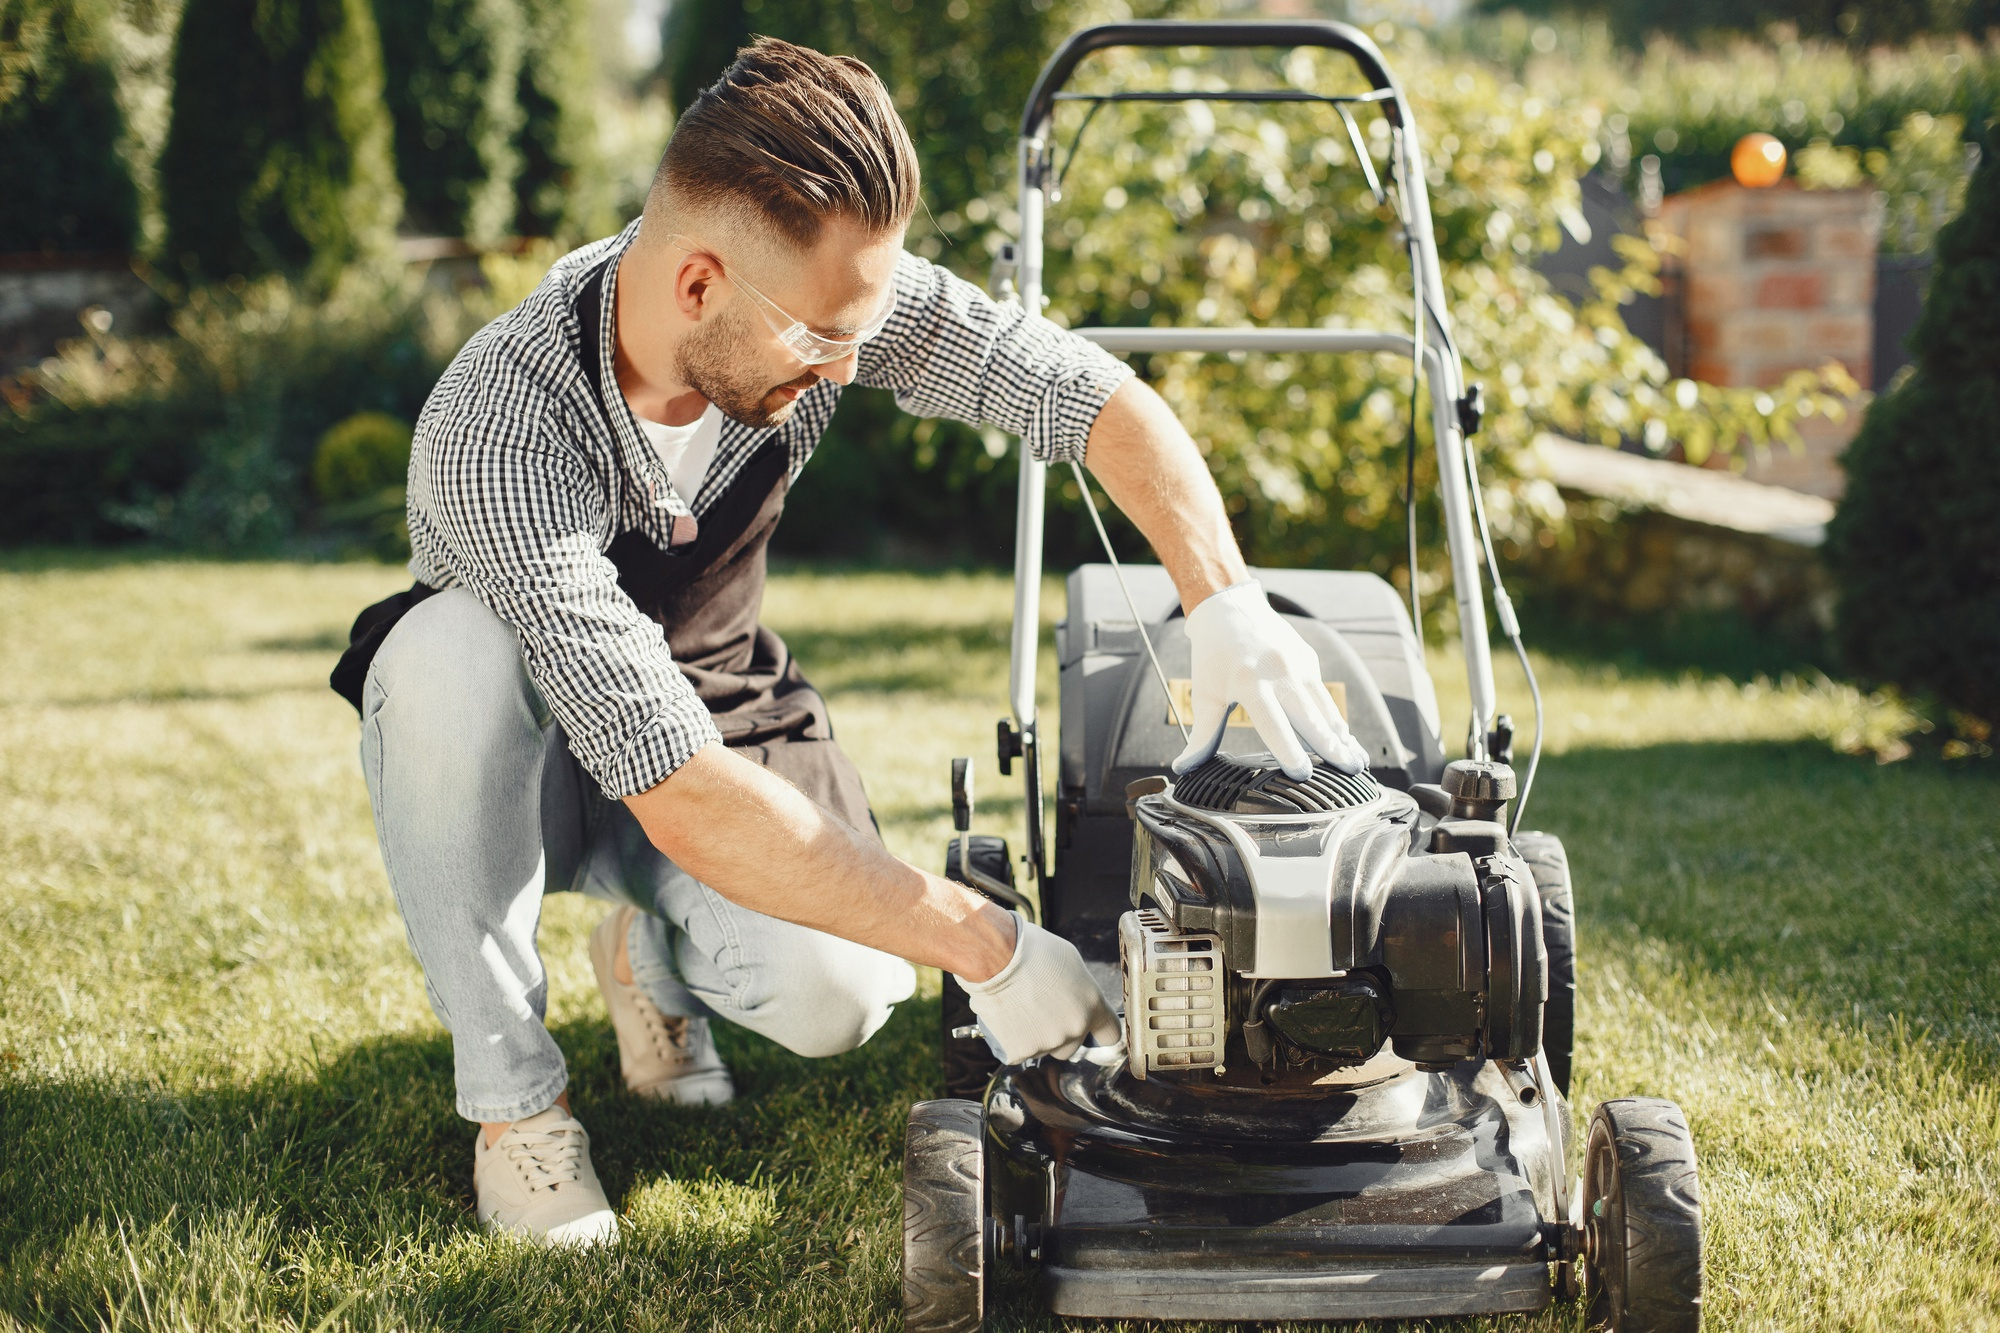 Garden Appliance Repair: 7 Essential Tips for Keeping Your Tools in Top Shape